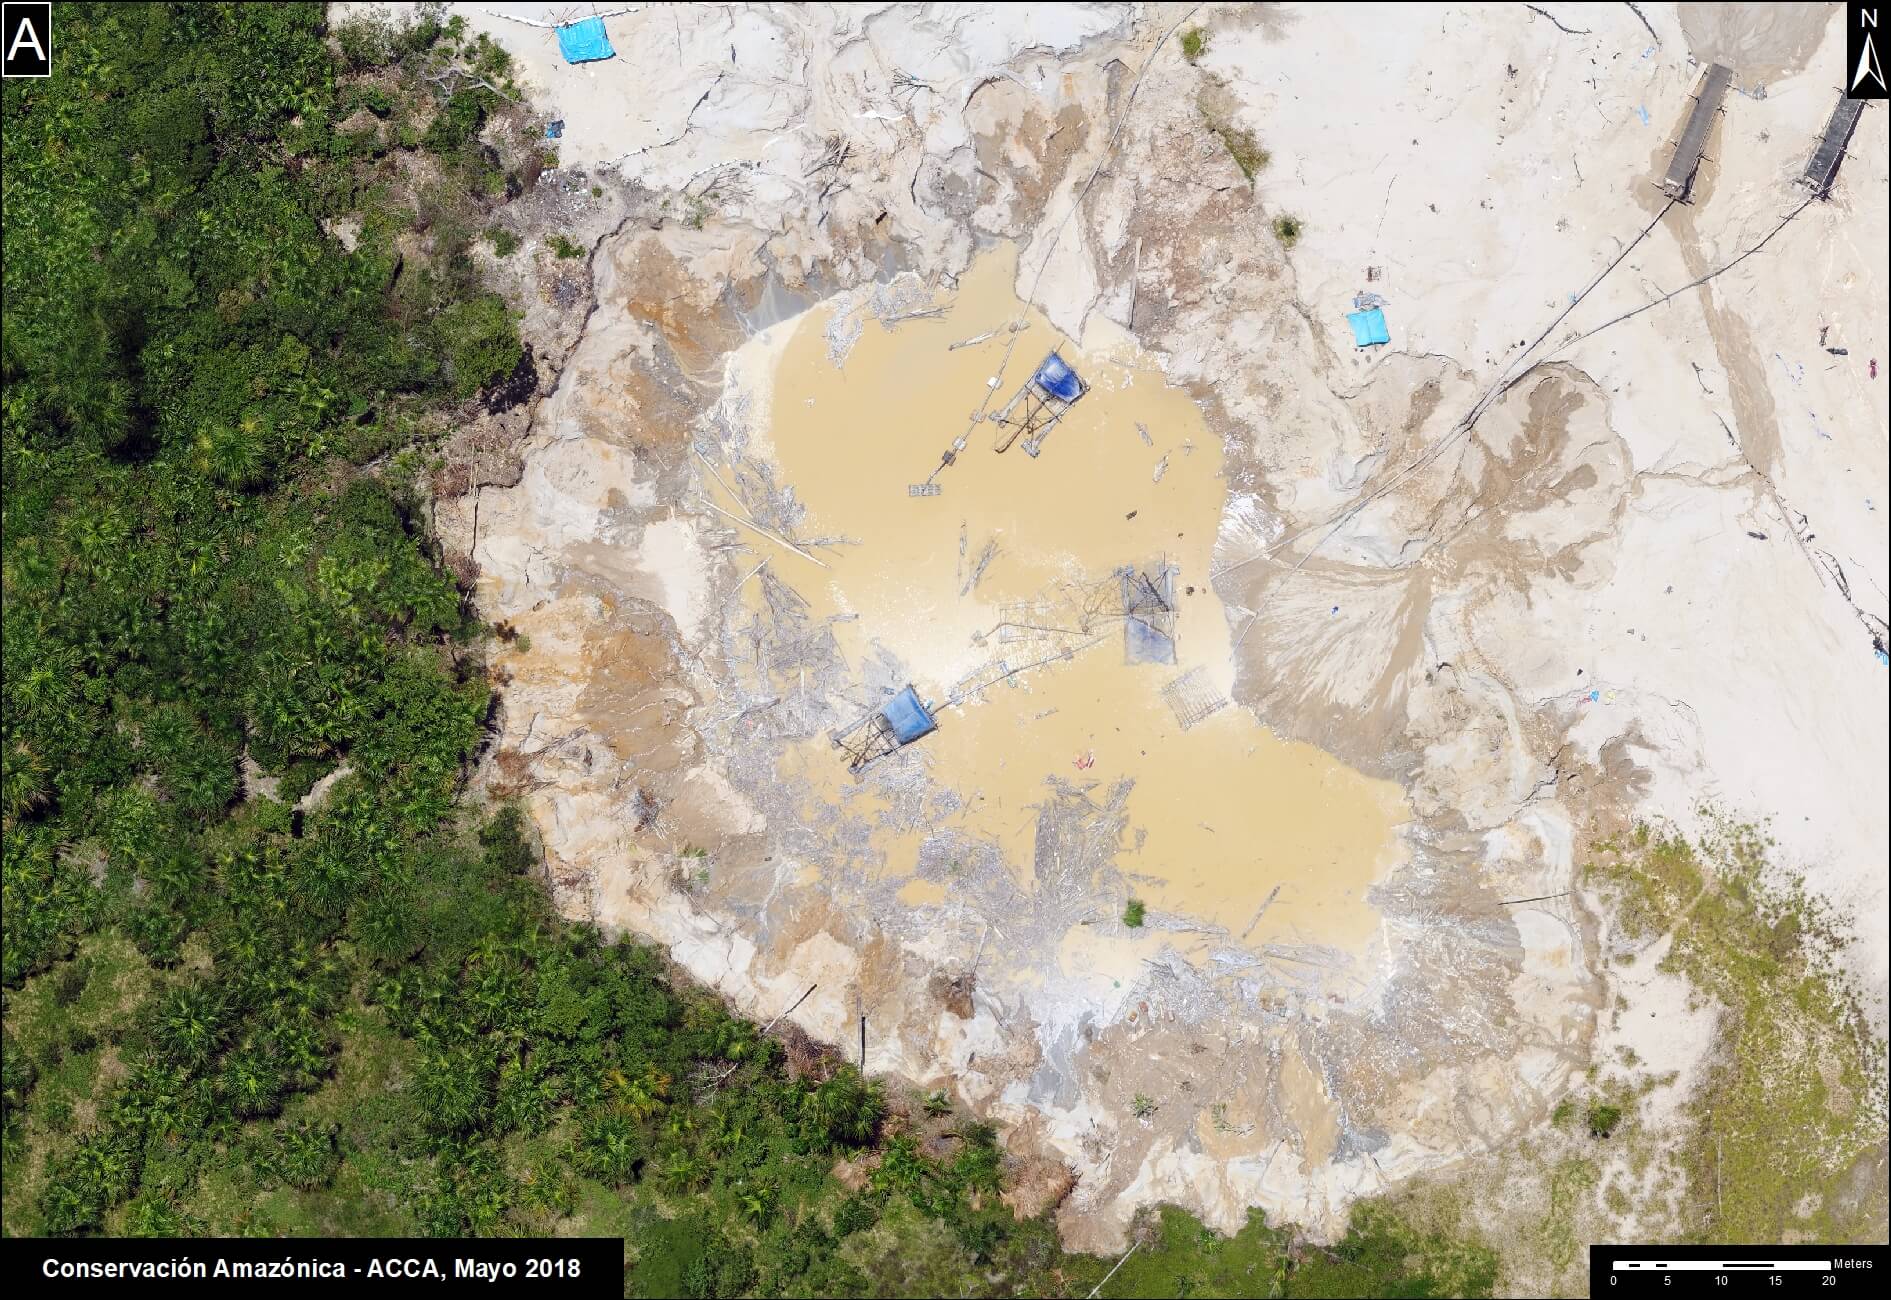 Image of gold mining in Peru Amazon forest taken by a drone